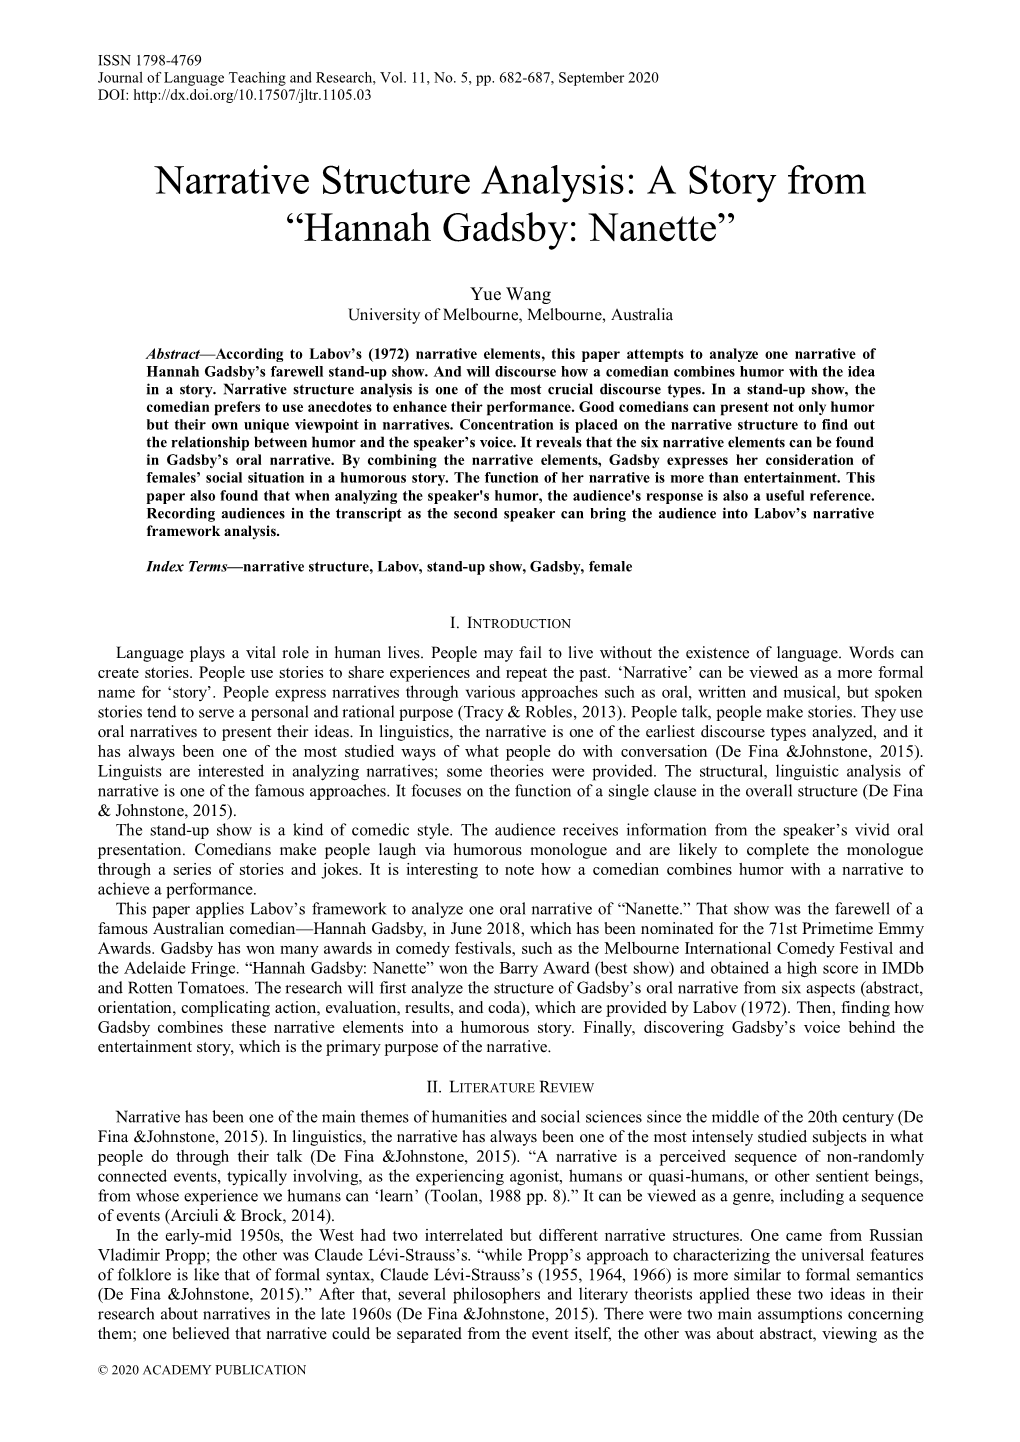 Narrative Structure Analysis: a Story from “Hannah Gadsby: Nanette”